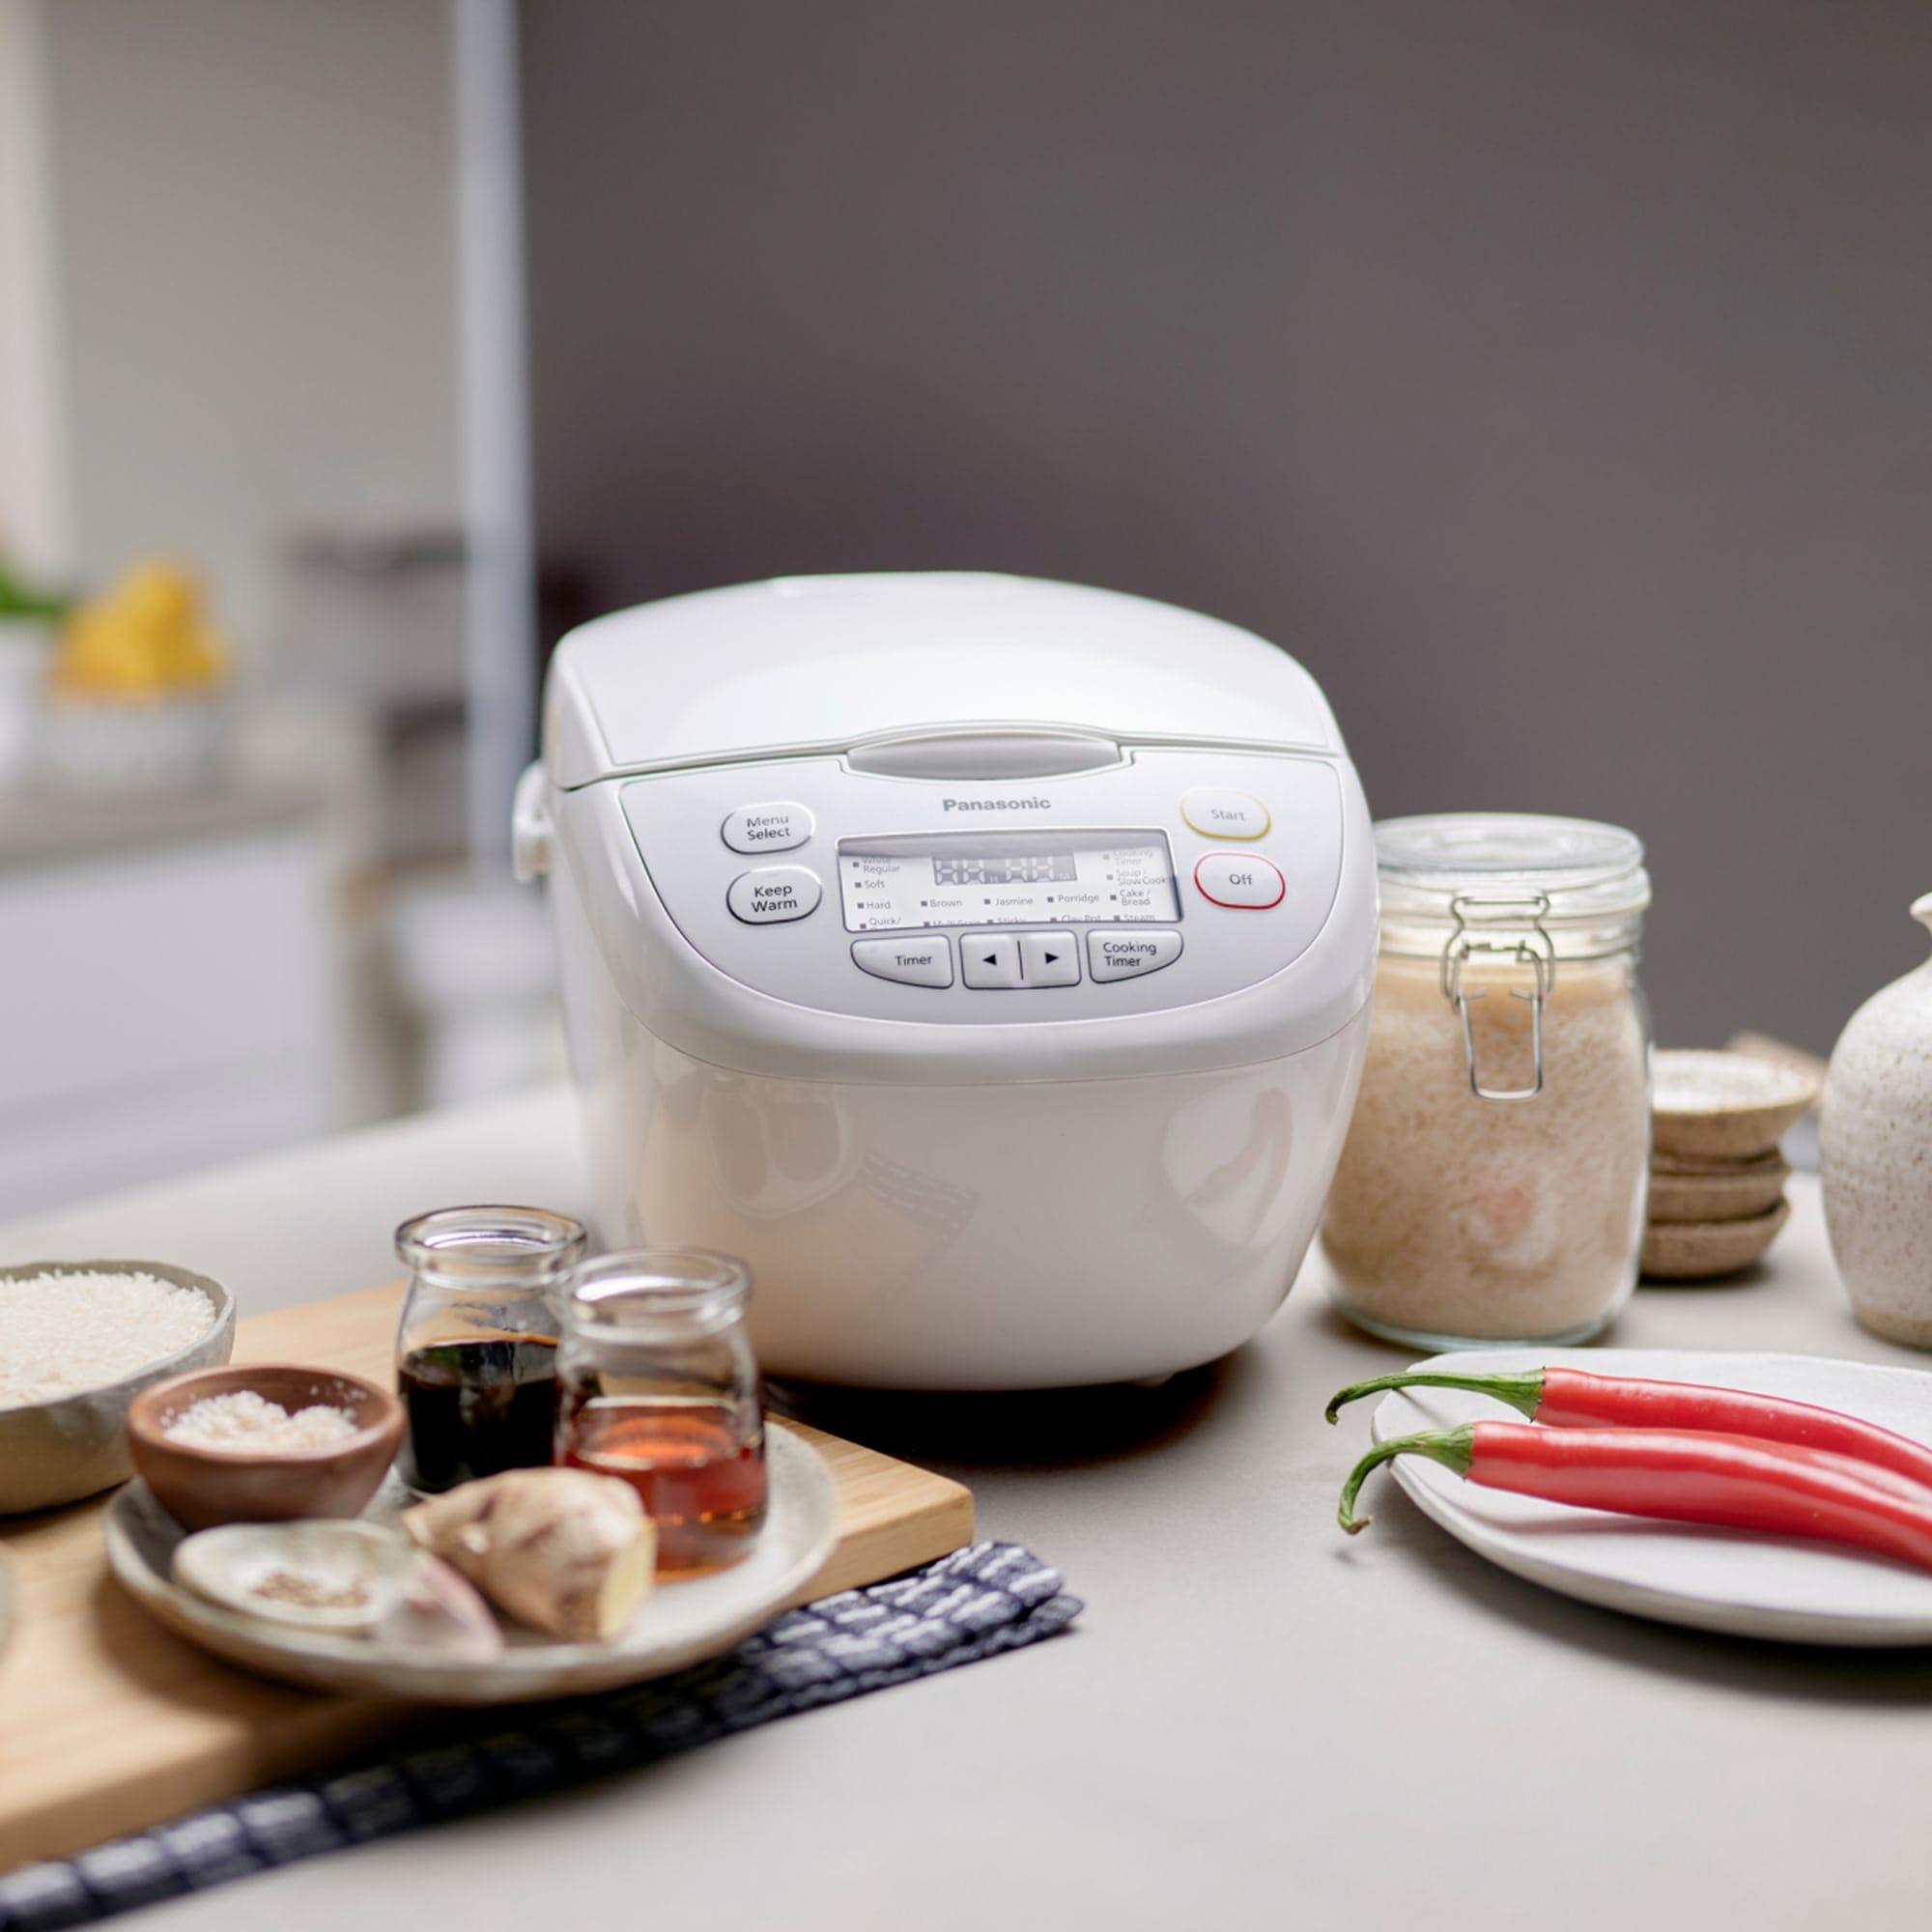 Panasonic Multi Function Rice Cooker 10 Cup White Image 3